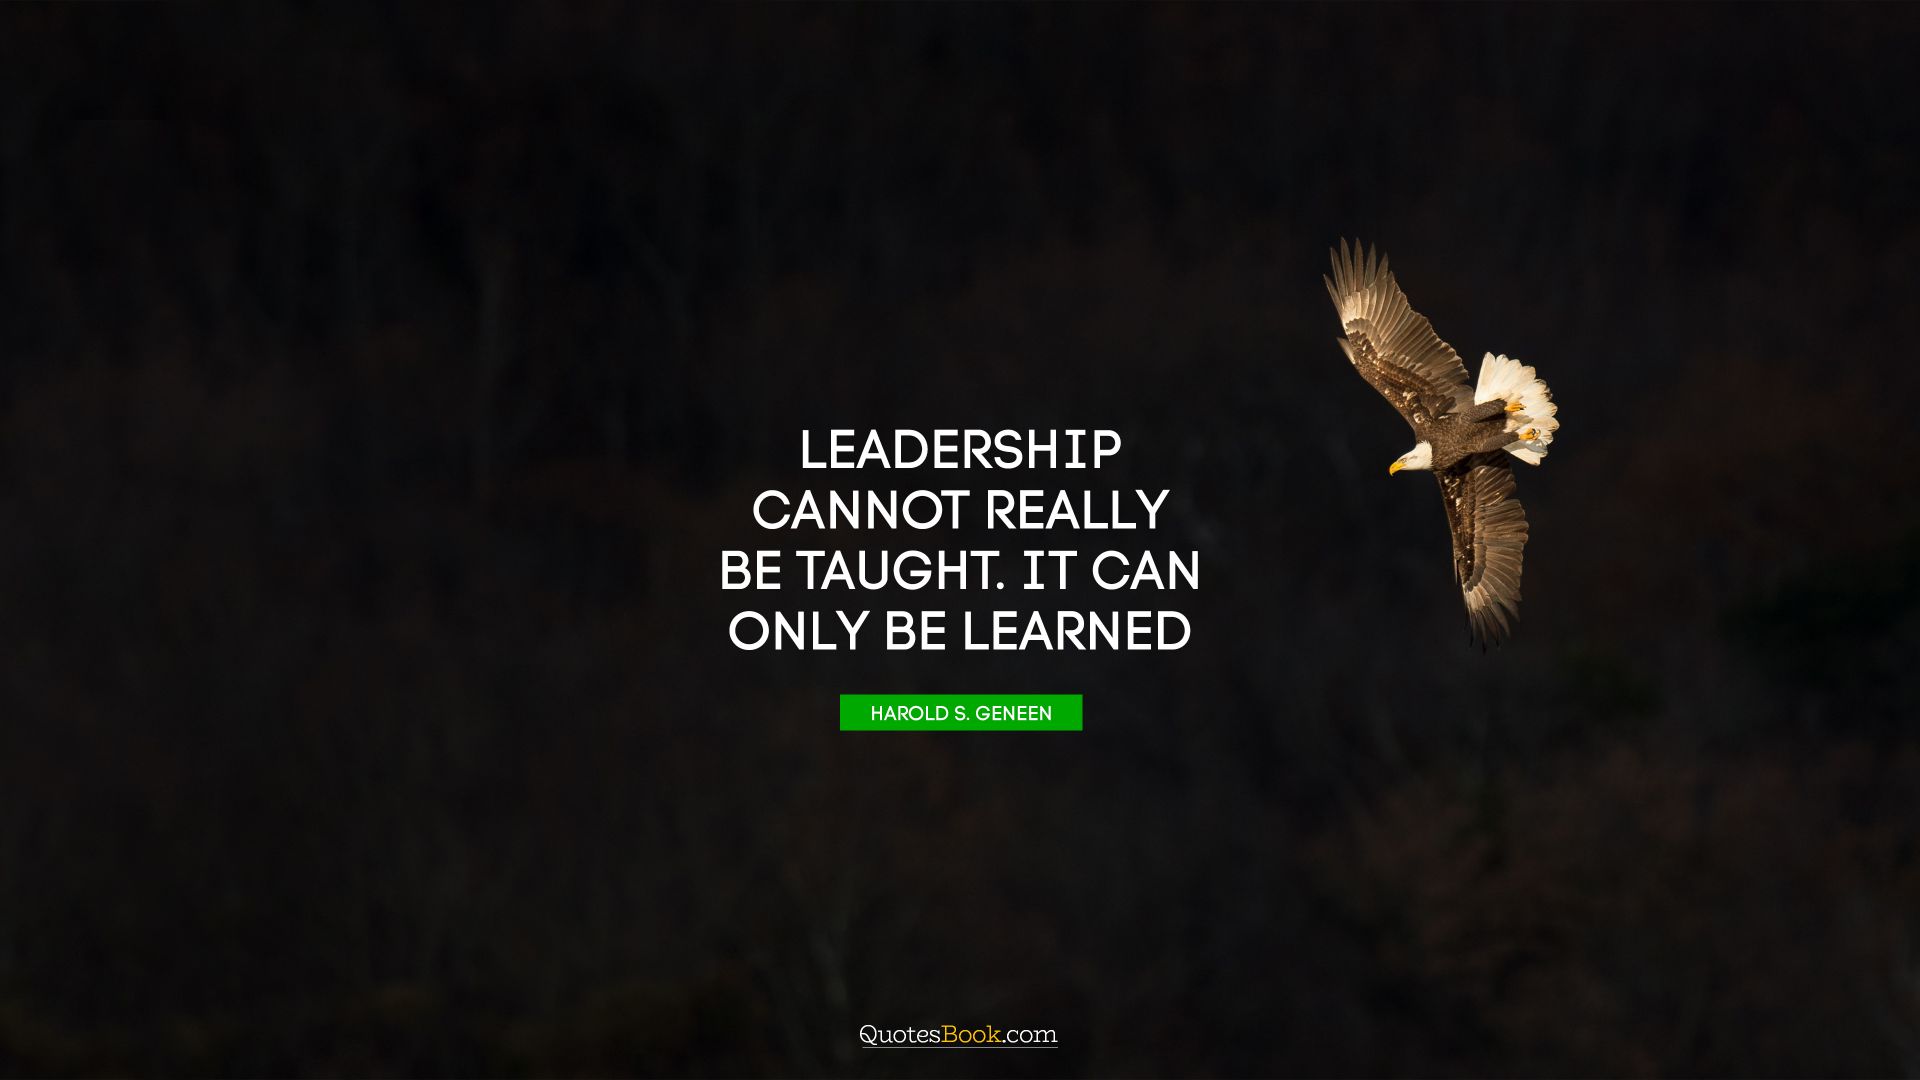 Leadership cannot really be taught. It can only be learned. - Quote by Harold S. Geneen